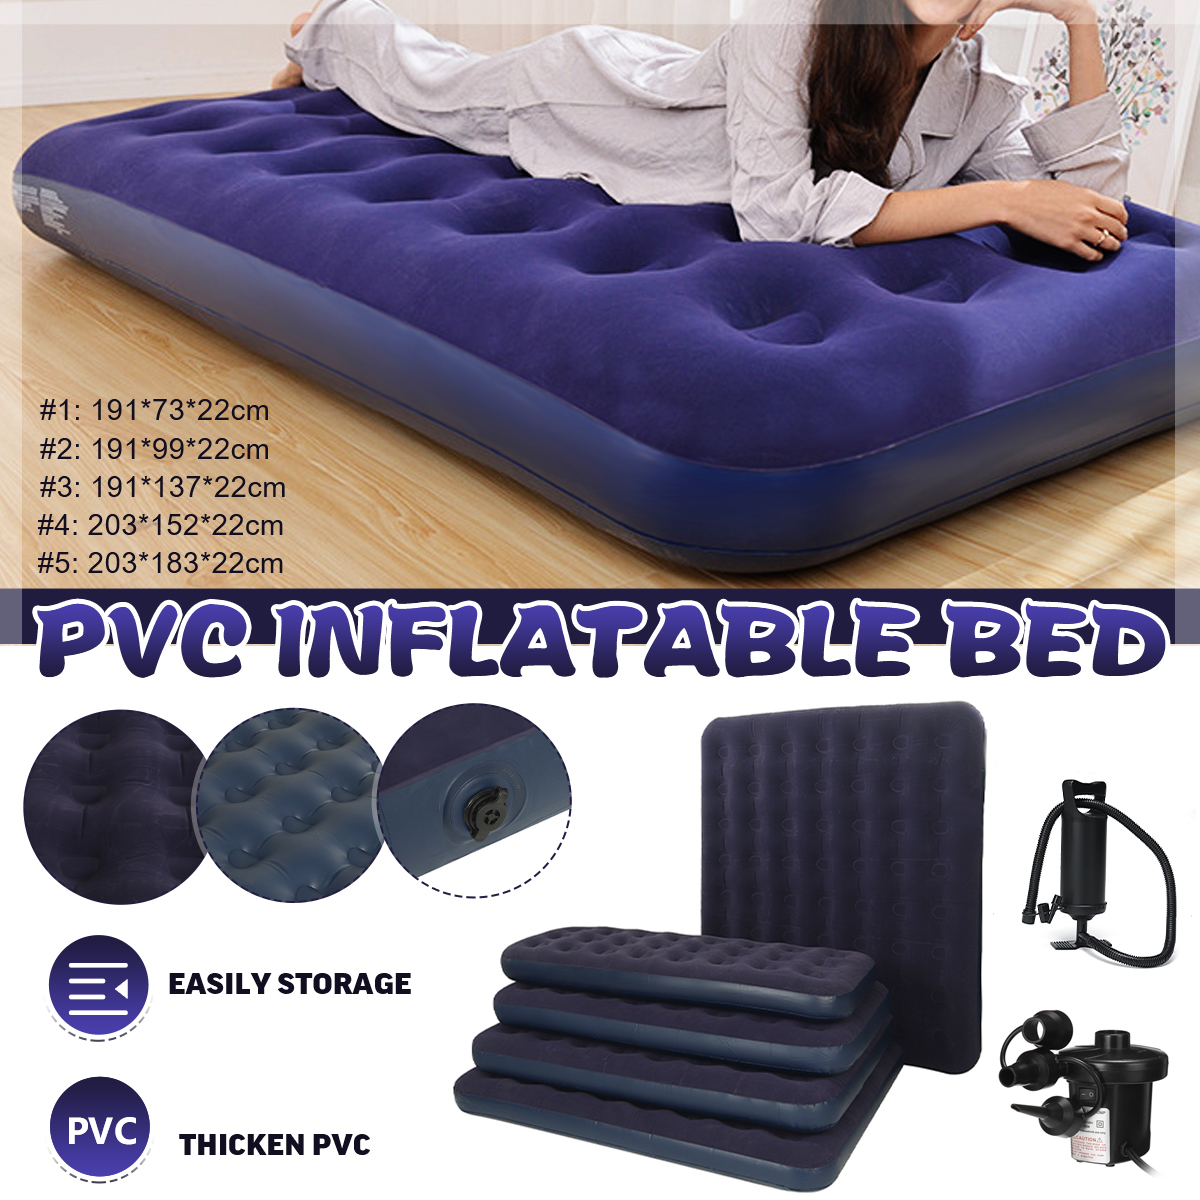 PVC-Inflatable-Bed-Inflatable-Mattress-Air-Mattress-Bed-Single-Double-Wide-Soft-Mattress-Comfortable-1842780-3